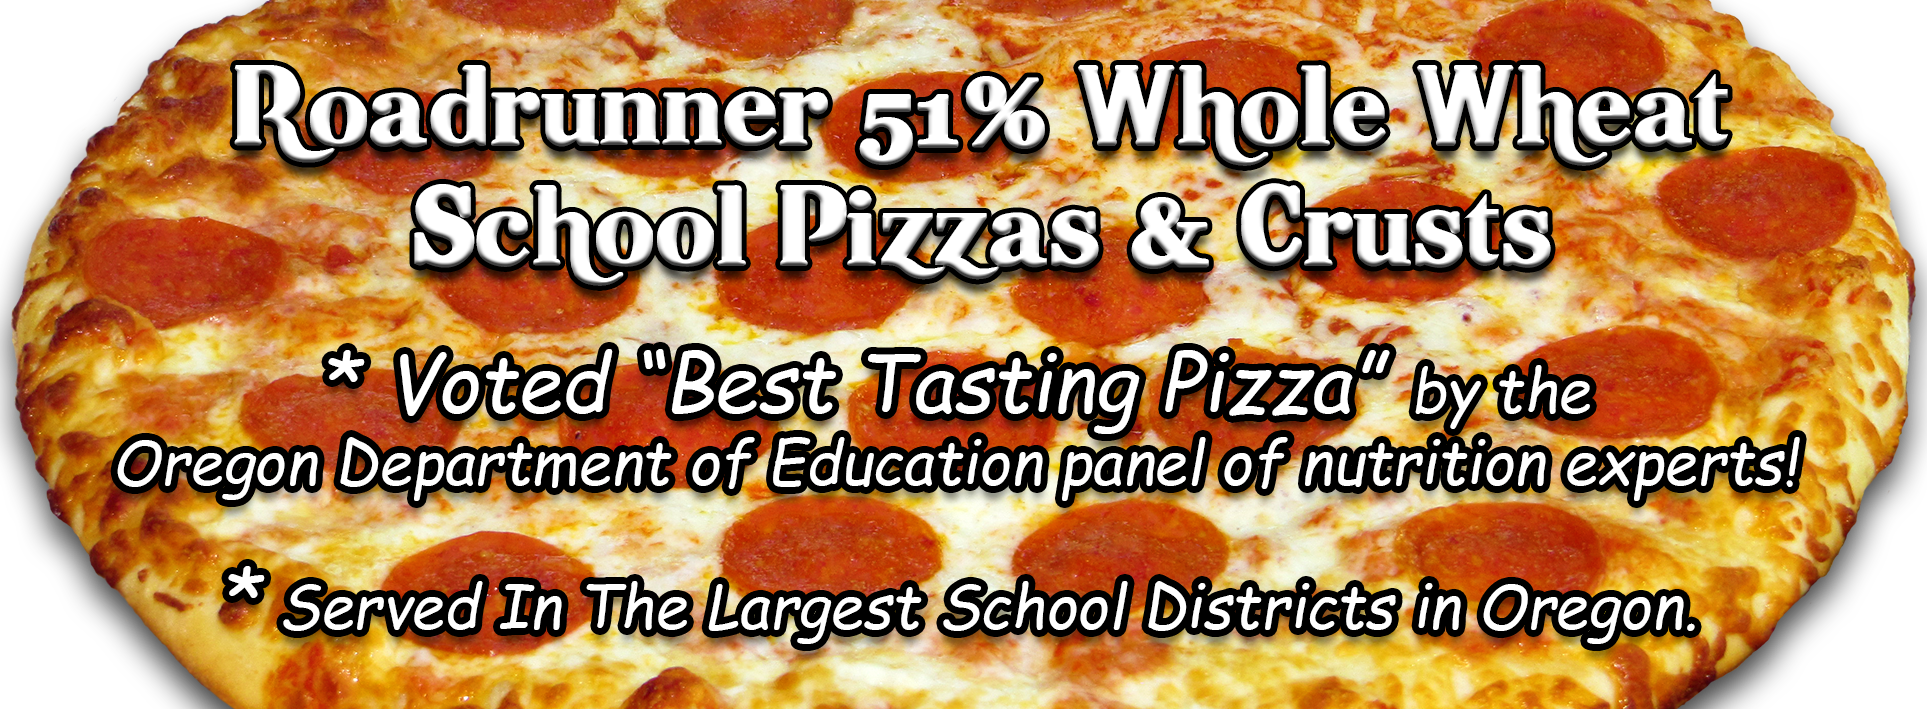 Roadrunner 51% Whole Wheat School Pizzas and Crusts